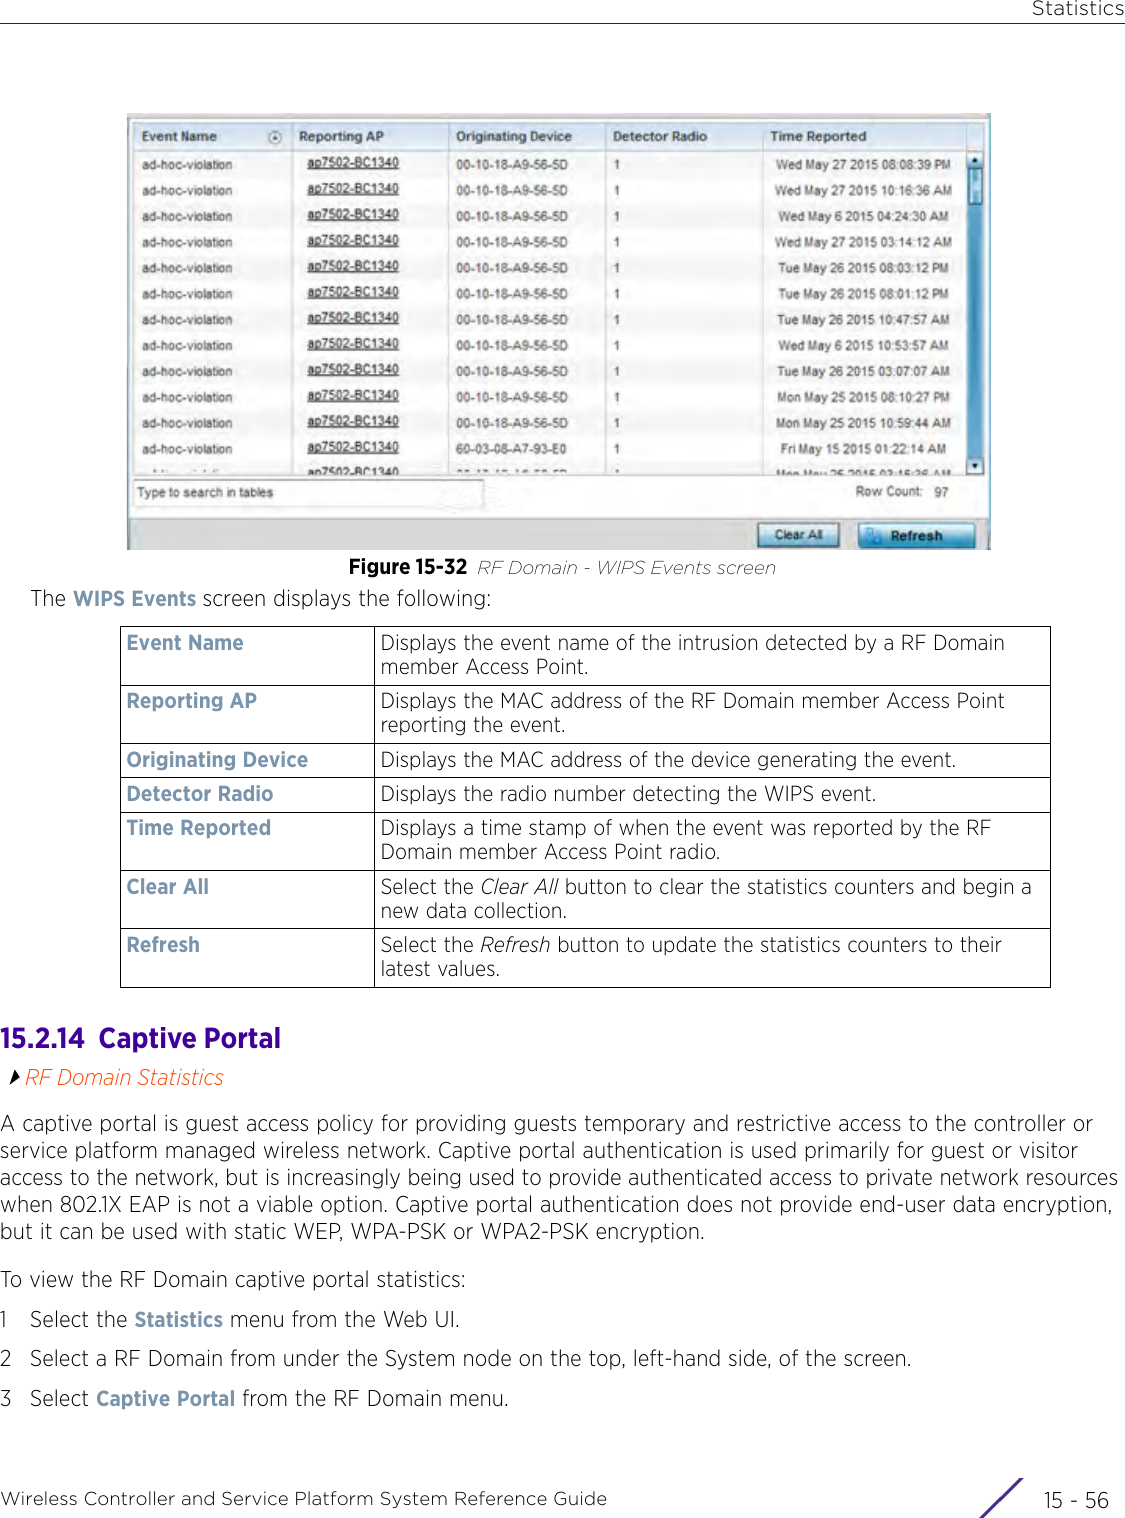 StatisticsWireless Controller and Service Platform System Reference Guide  15 - 56Figure 15-32 RF Domain - WIPS Events screenThe WIPS Events screen displays the following:15.2.14  Captive PortalRF Domain StatisticsA captive portal is guest access policy for providing guests temporary and restrictive access to the controller or service platform managed wireless network. Captive portal authentication is used primarily for guest or visitor access to the network, but is increasingly being used to provide authenticated access to private network resources when 802.1X EAP is not a viable option. Captive portal authentication does not provide end-user data encryption, but it can be used with static WEP, WPA-PSK or WPA2-PSK encryption.To view the RF Domain captive portal statistics:1 Select the Statistics menu from the Web UI.2 Select a RF Domain from under the System node on the top, left-hand side, of the screen.3Select Captive Portal from the RF Domain menu.Event Name Displays the event name of the intrusion detected by a RF Domain member Access Point.Reporting AP Displays the MAC address of the RF Domain member Access Point reporting the event.Originating Device Displays the MAC address of the device generating the event.Detector Radio Displays the radio number detecting the WIPS event.  Time Reported Displays a time stamp of when the event was reported by the RF Domain member Access Point radio.Clear All Select the Clear All button to clear the statistics counters and begin a new data collection. Refresh Select the Refresh button to update the statistics counters to their latest values.